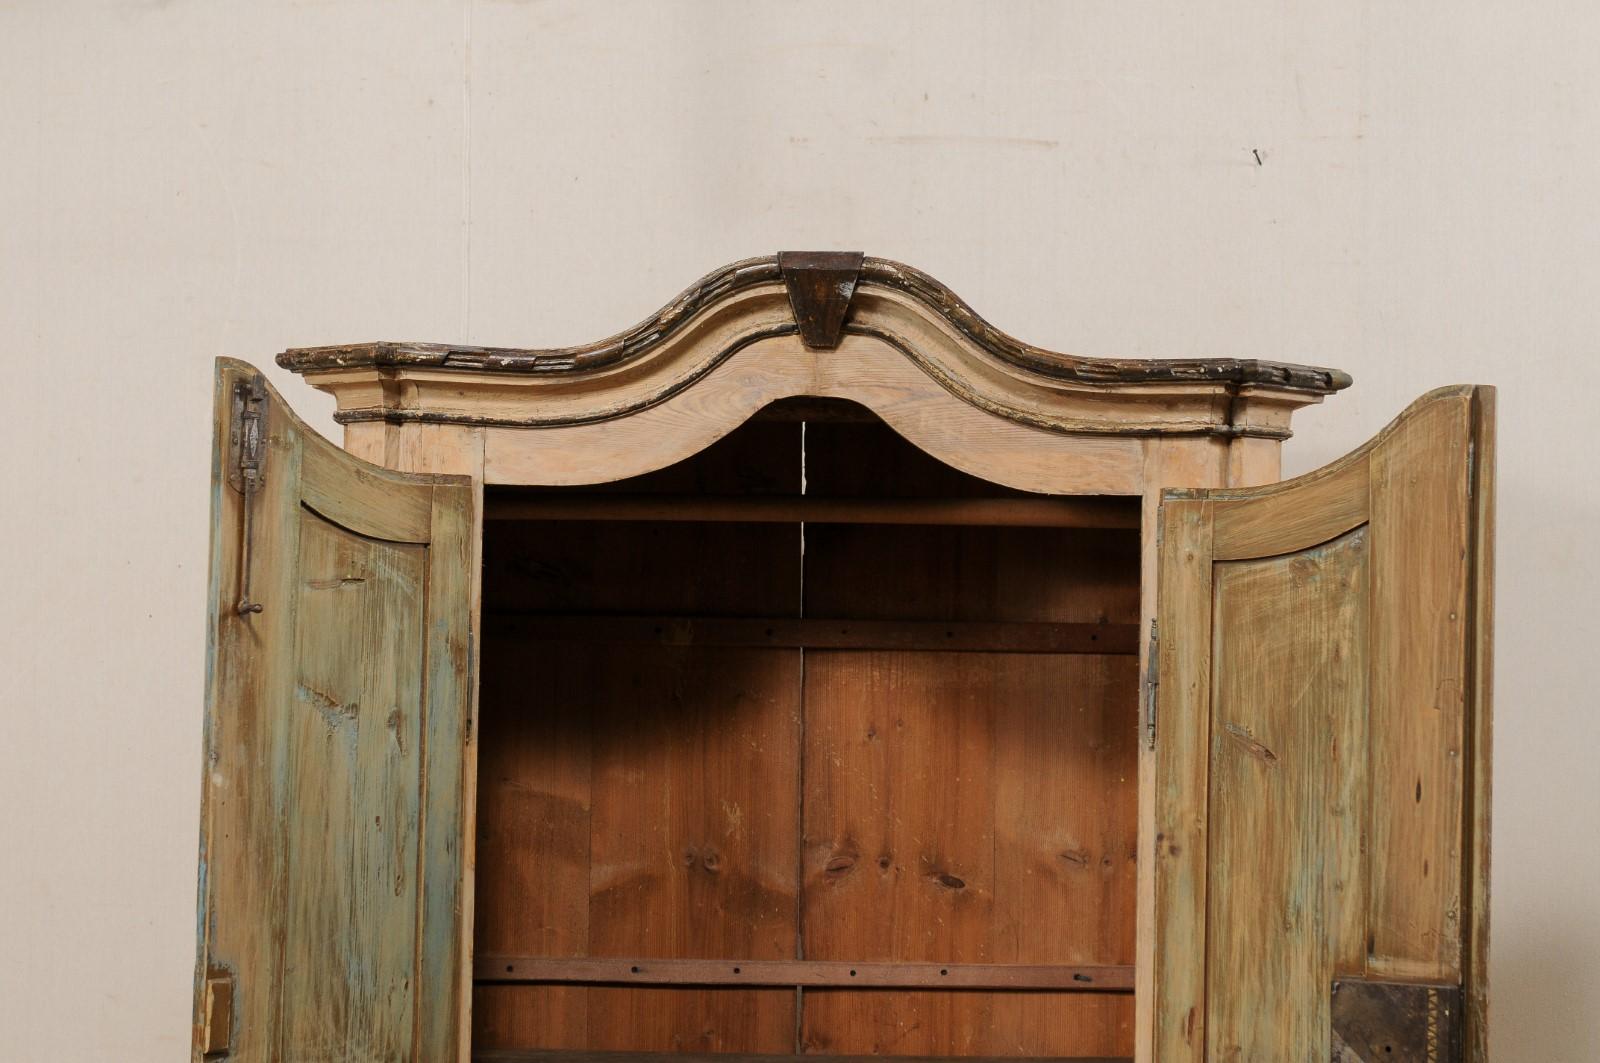 19th Century 19th C. German Tall Storage Cabinet w/ Arched Cornice & Decorative Carvings For Sale